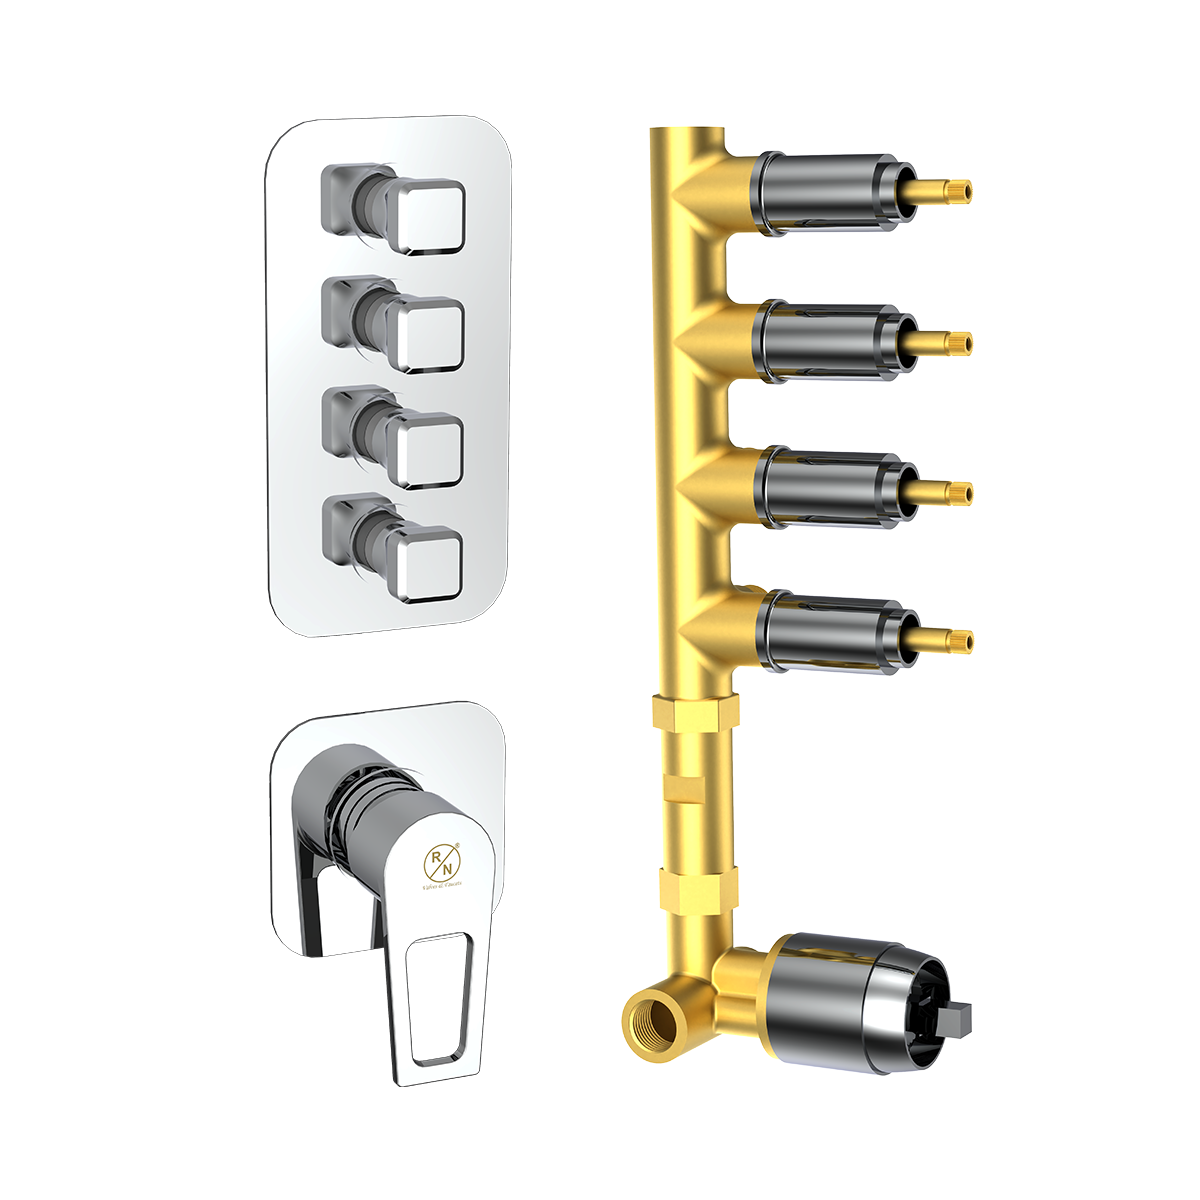 6 Way Single Lever Concealed Diverter Body,With Expose Part Kit (Consisting Of Operating Lever,Wall Flange & Knobs )